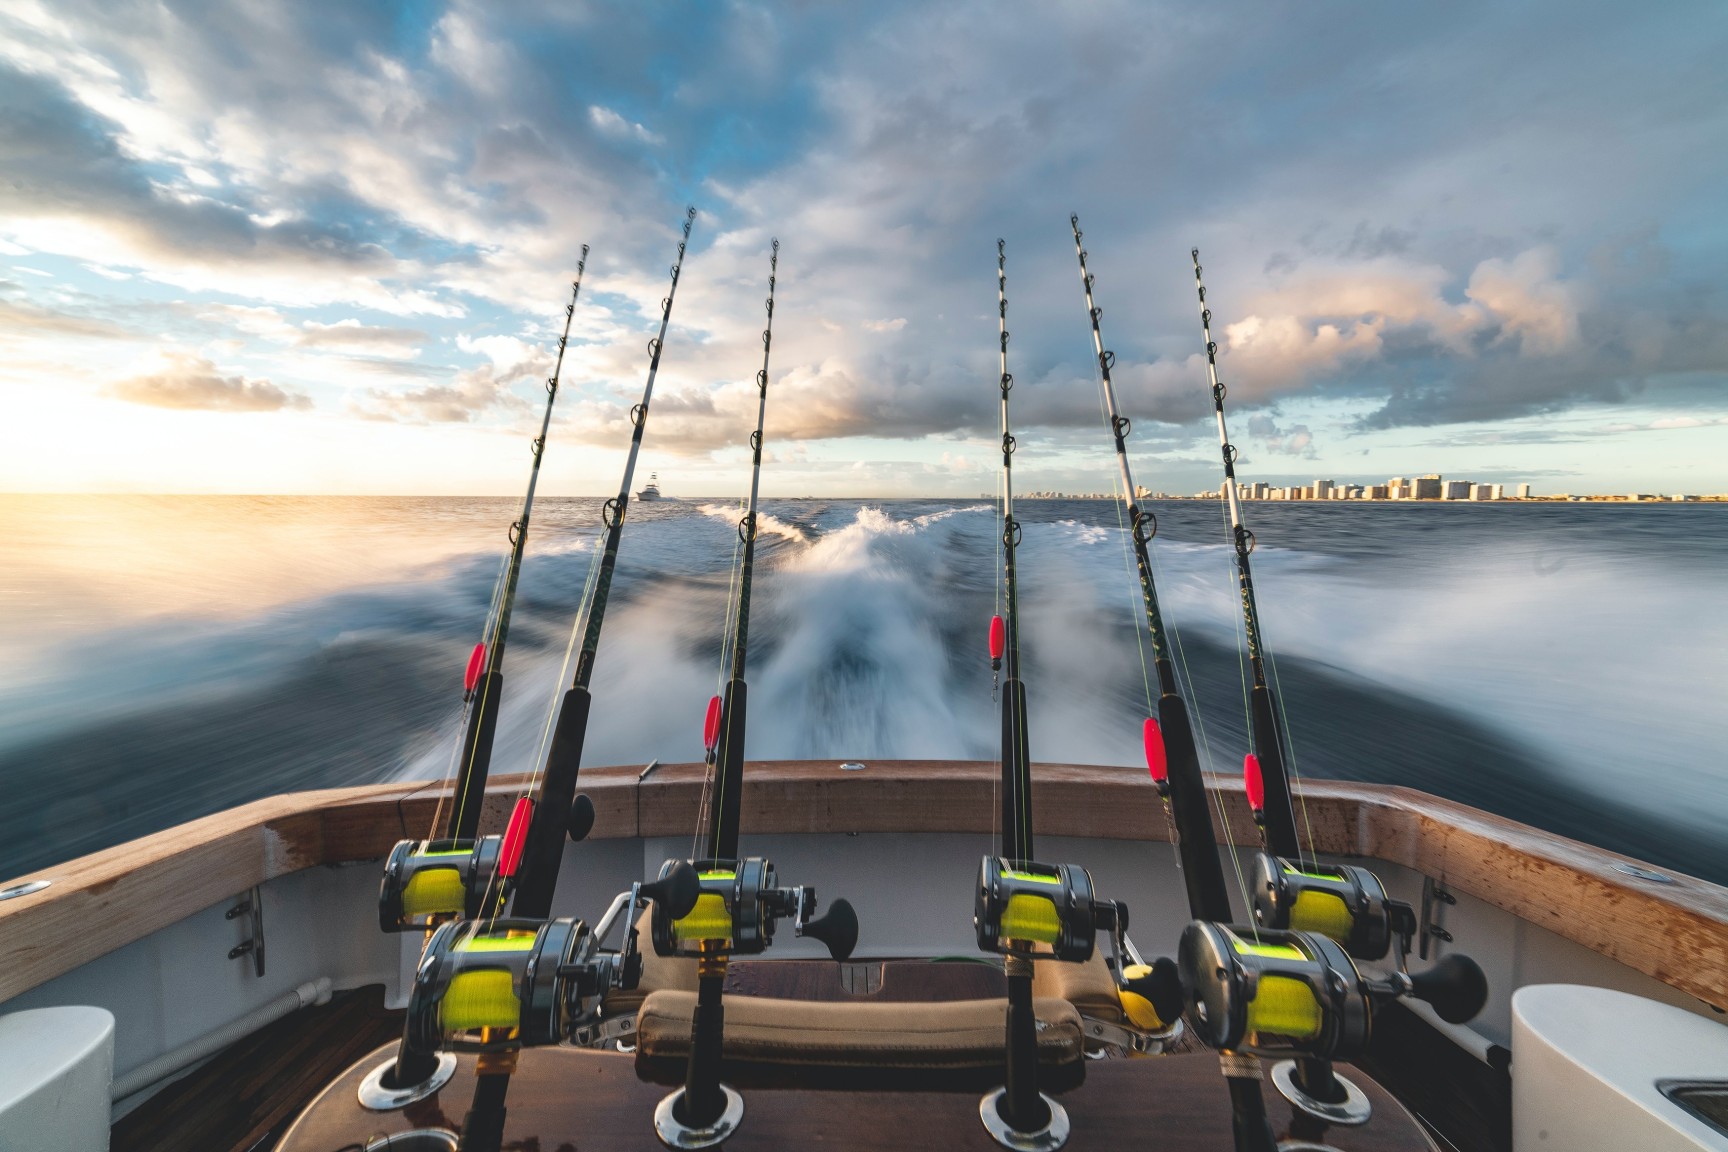 Improve your cash flow by learning to fish